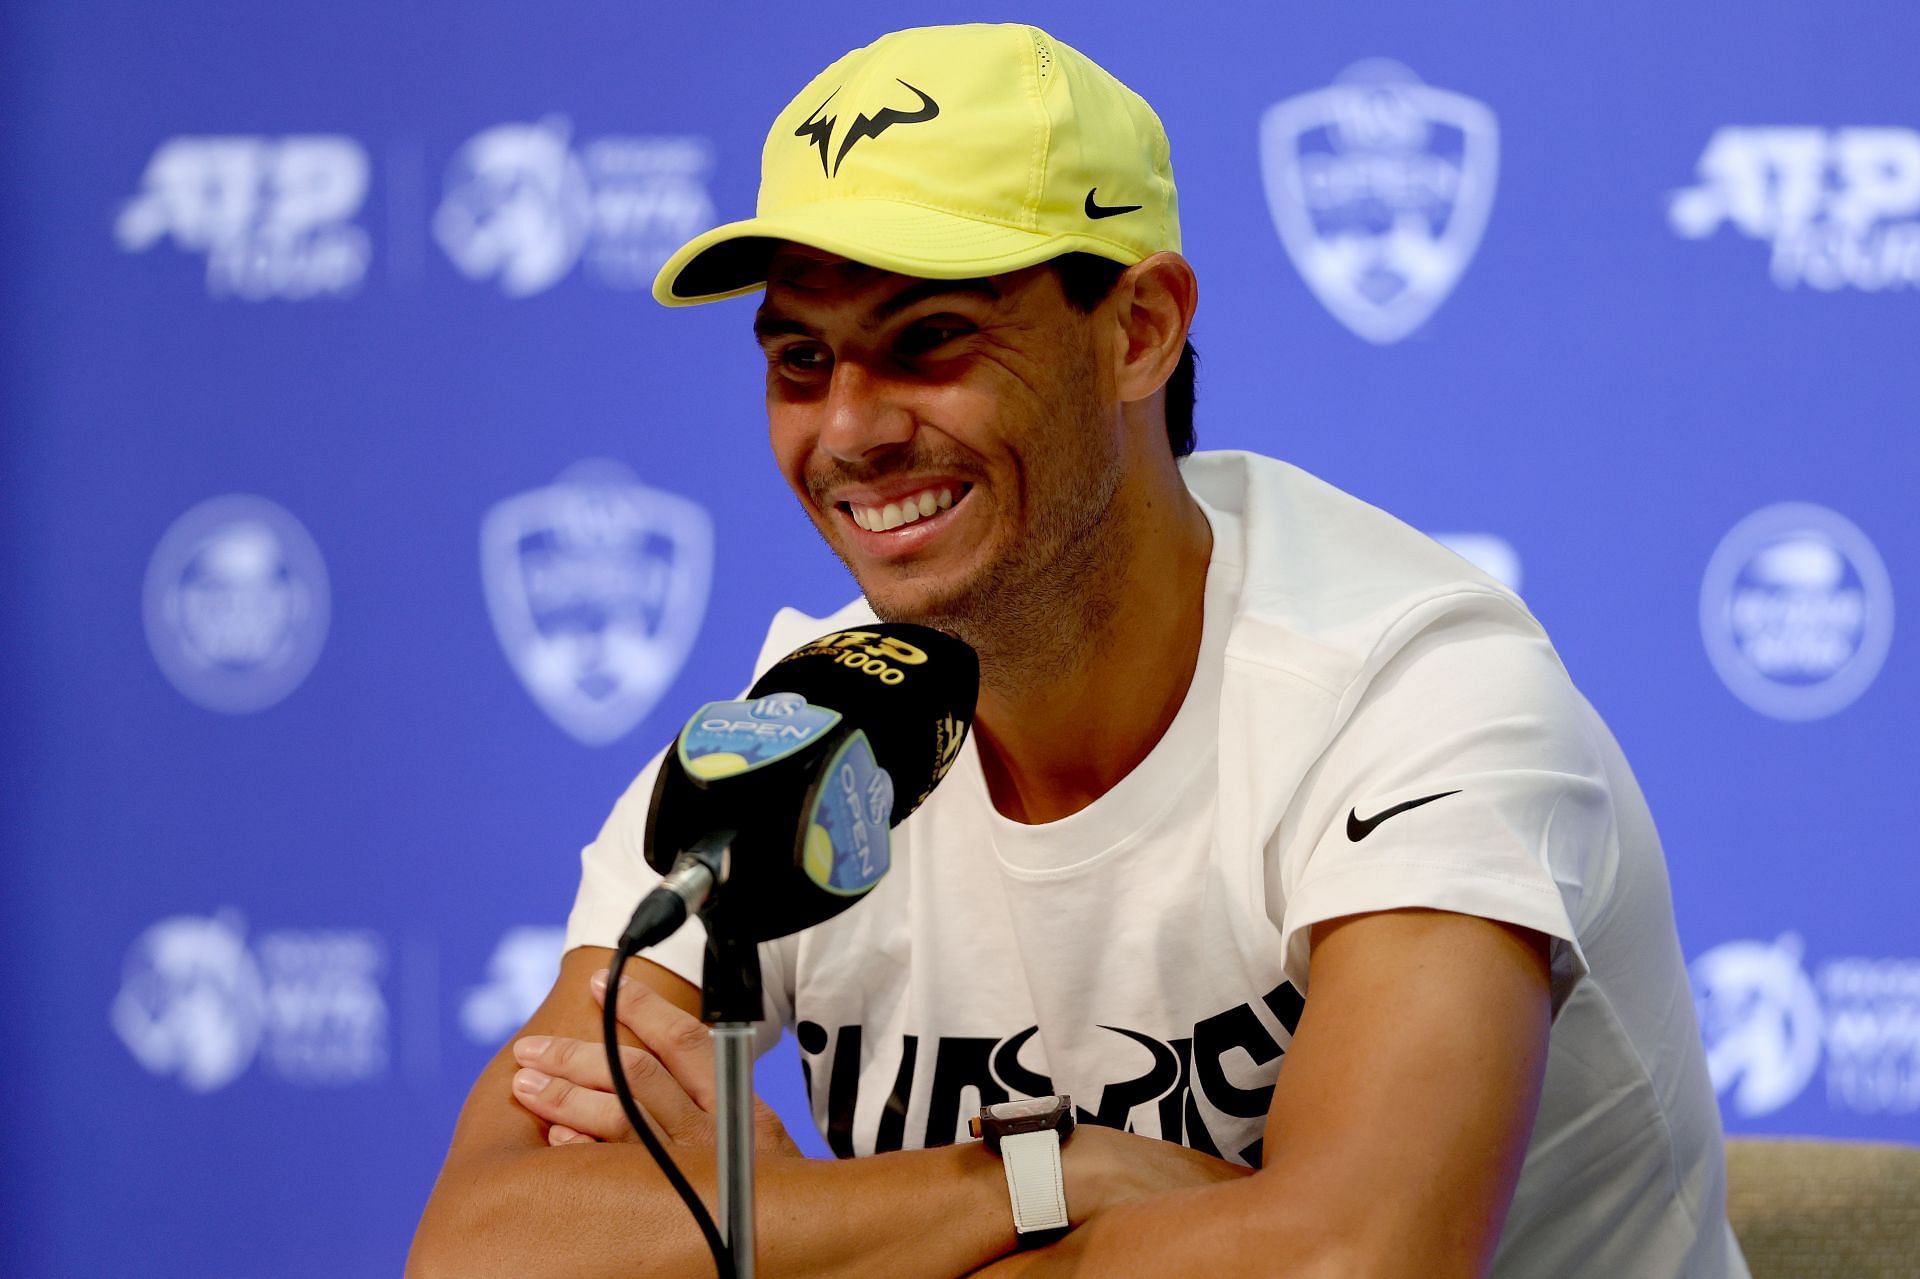 Rafael Nadal is gearing up for the US Open